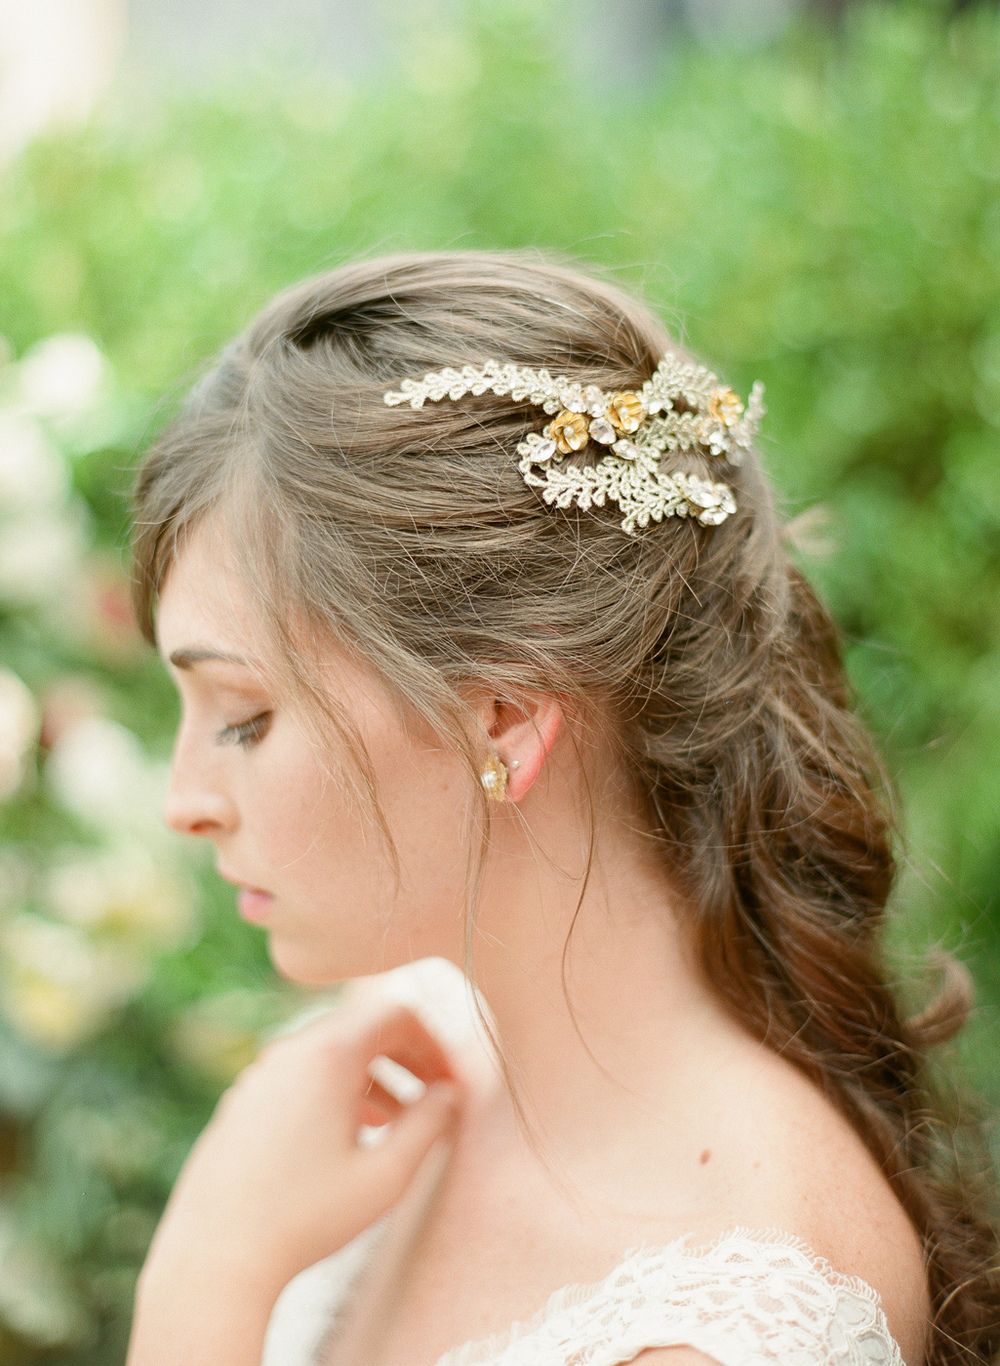 gold vine hair comb with flowers hushed commmotion